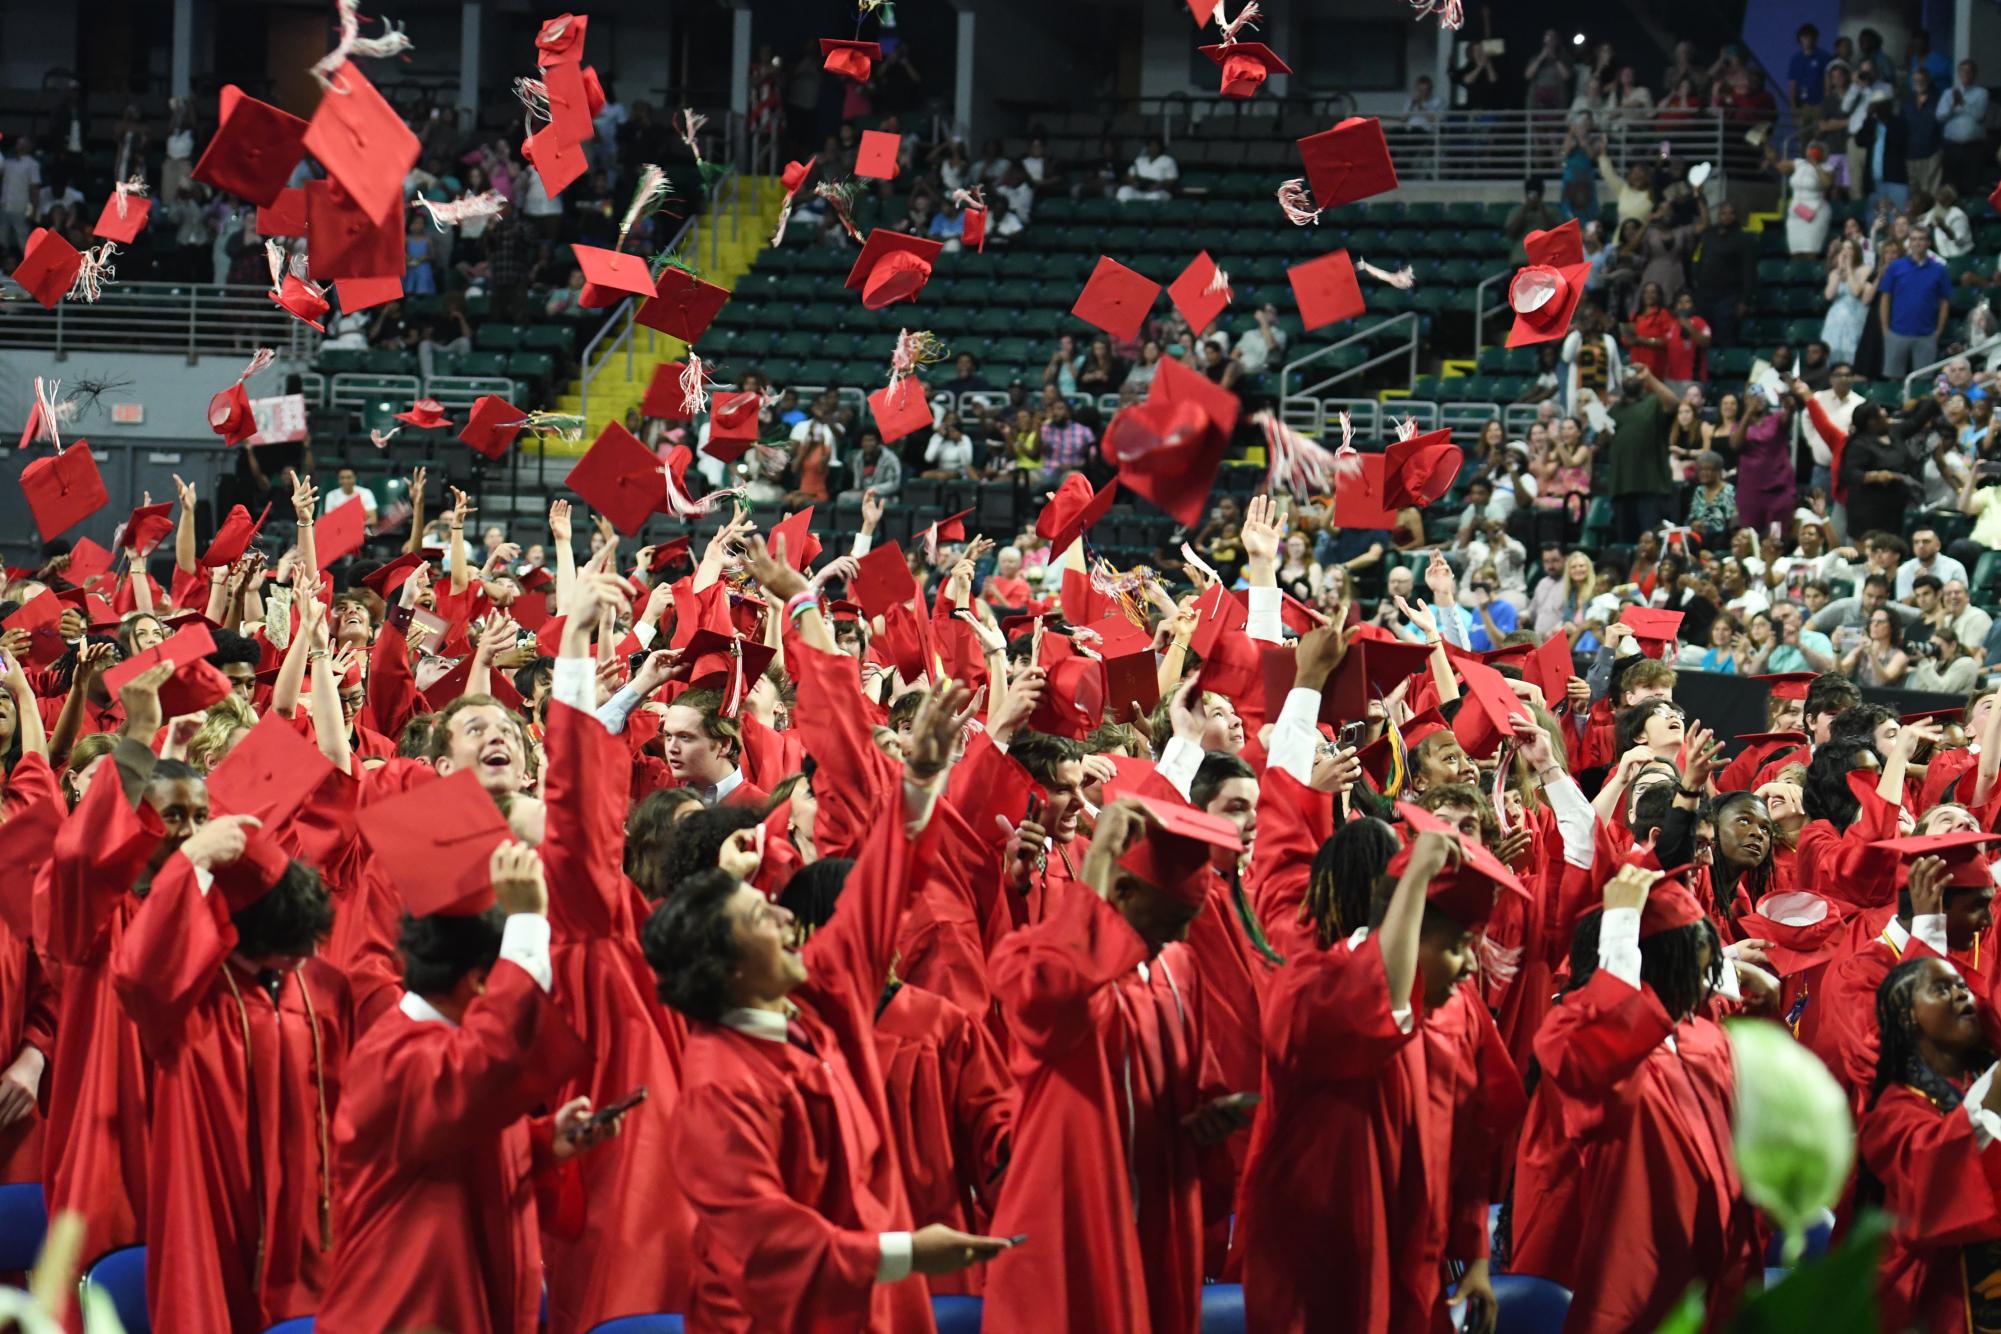 On May 21, the seniors celebrate their graduation at St. Charles Family Arena by throwing their caps in the air.